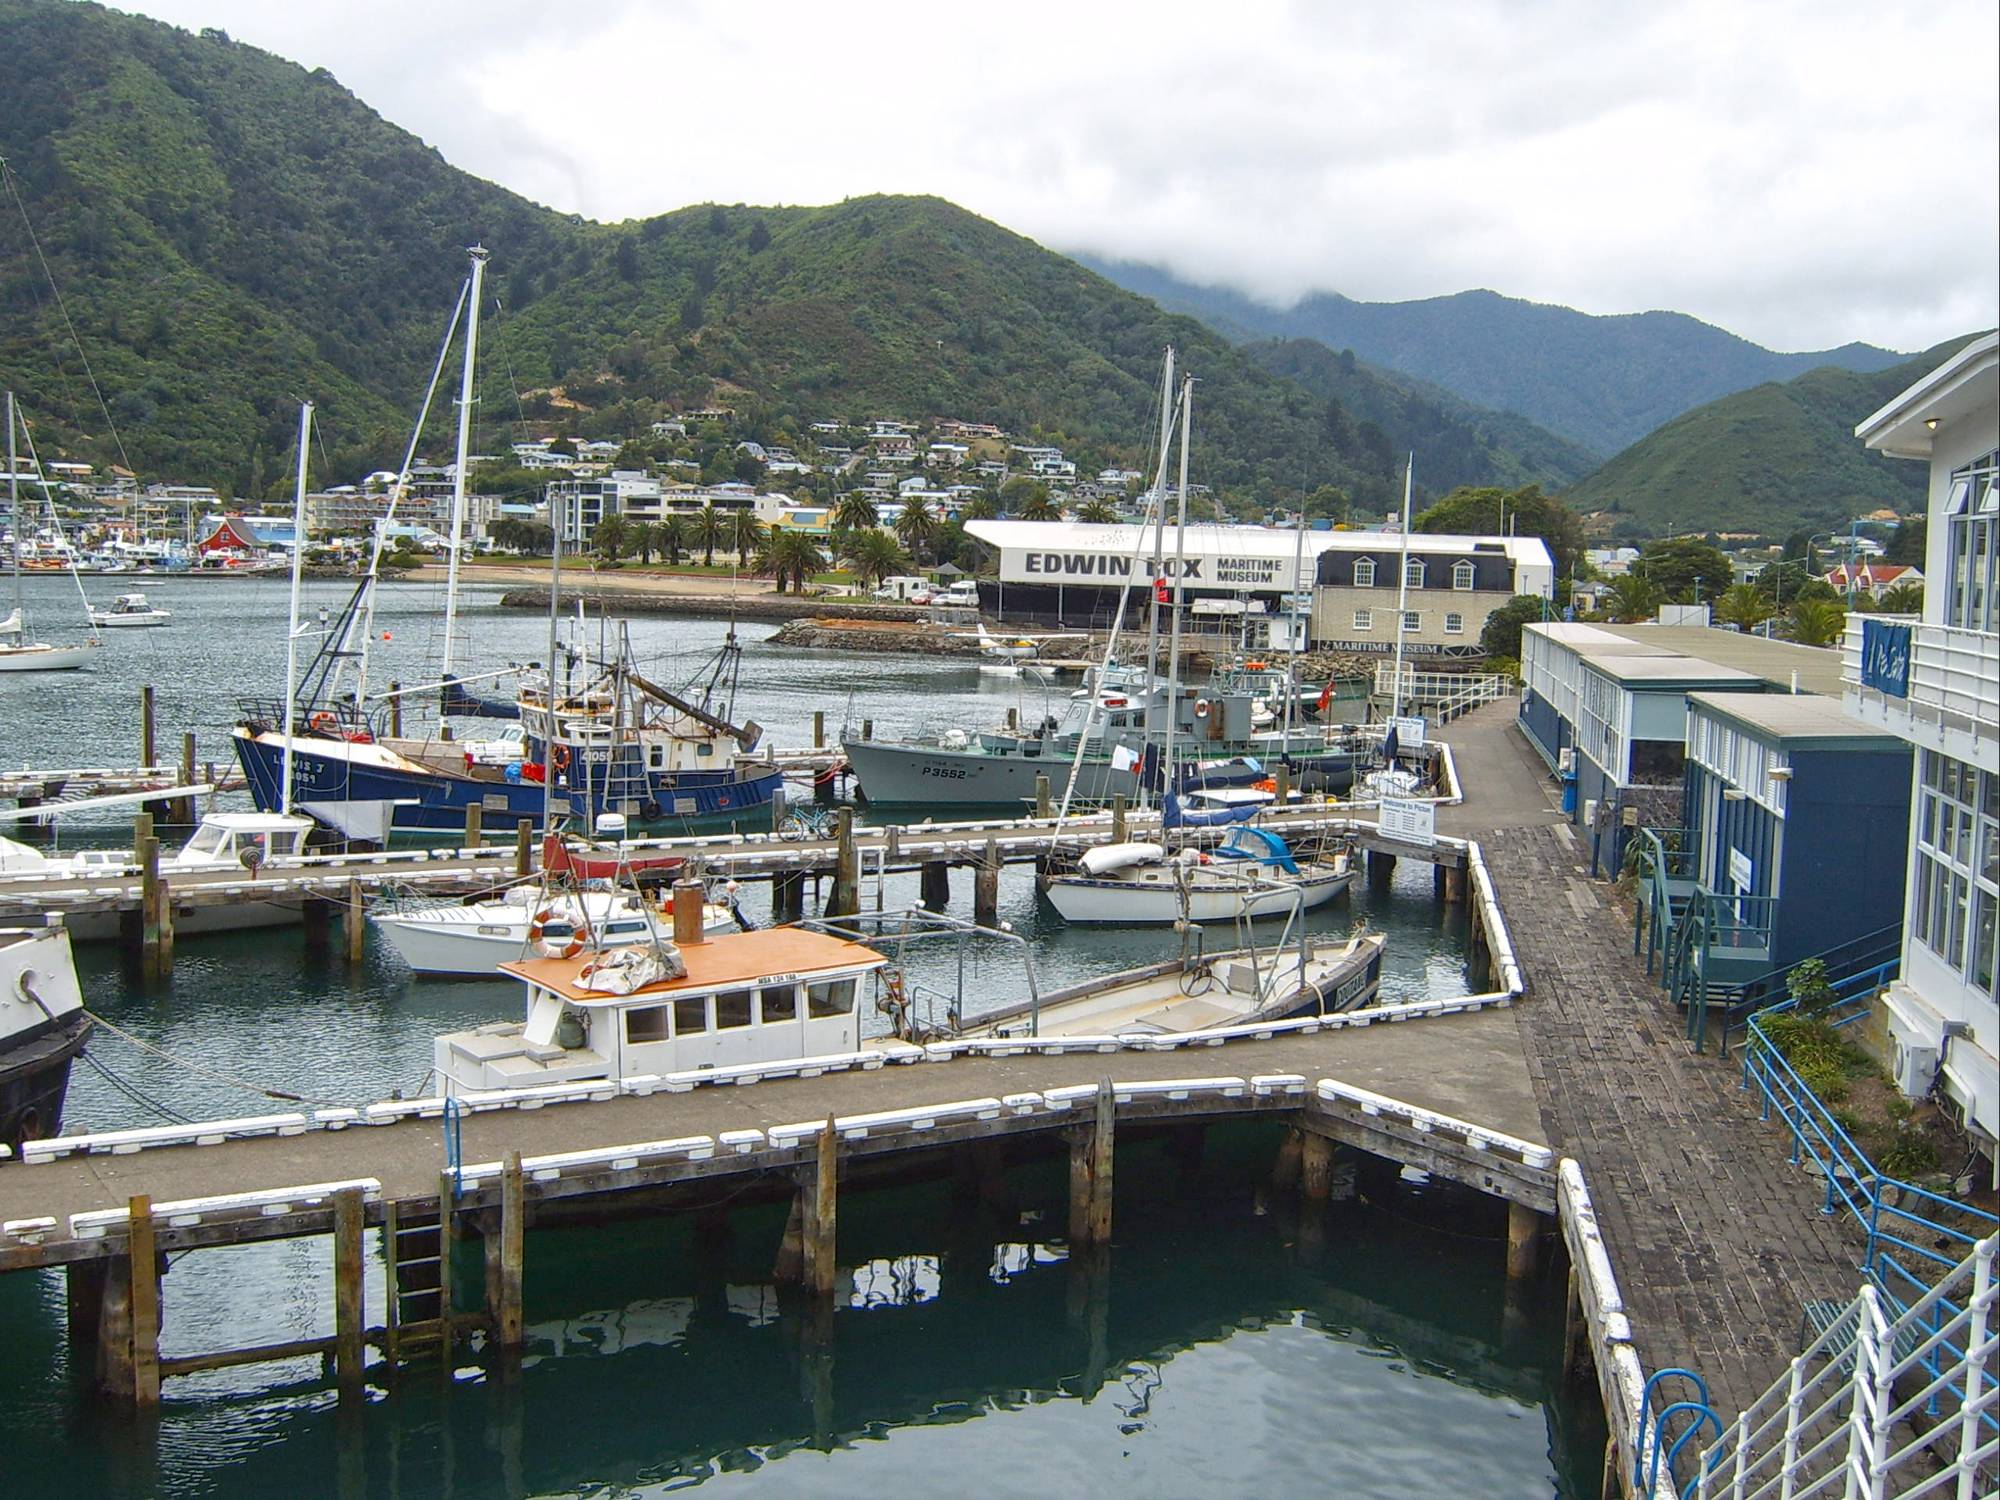 My old photo of Picton Port in 2007